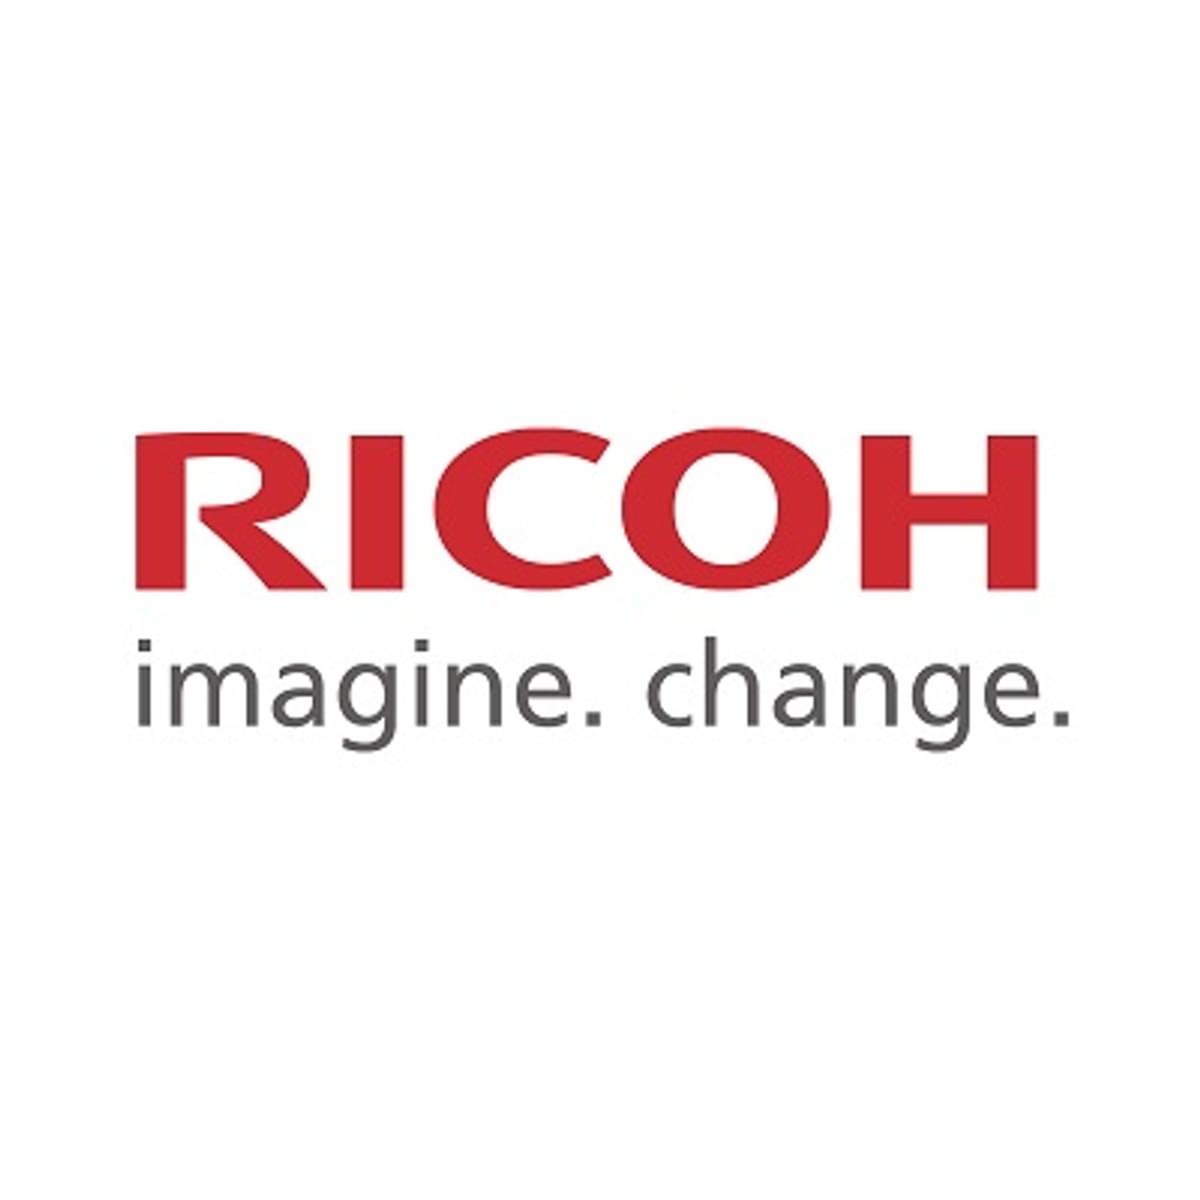 Ricoh neemt Axon Ivy AG over image